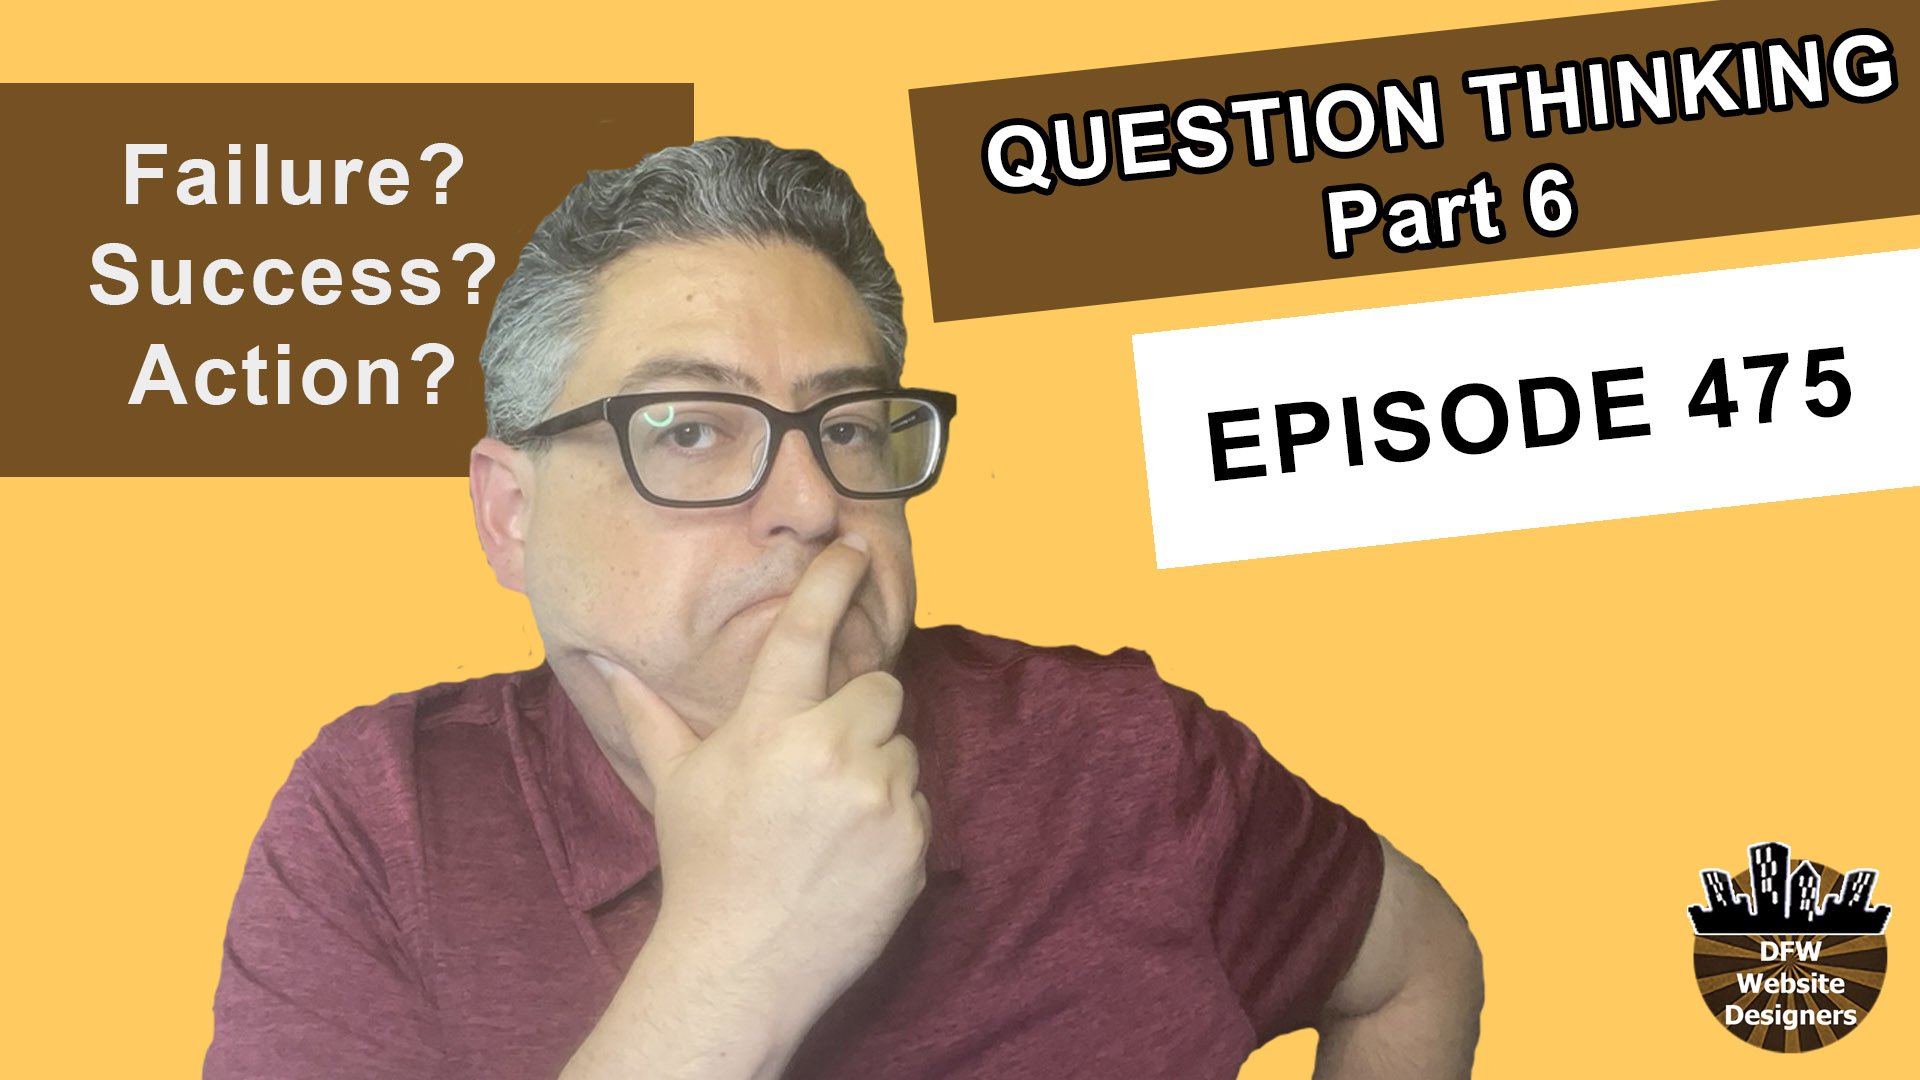 Episode 475 Question Thinking Part 6 Learning: From this Mistake or Failure? From this Success? What Action Makes the Most Sense?